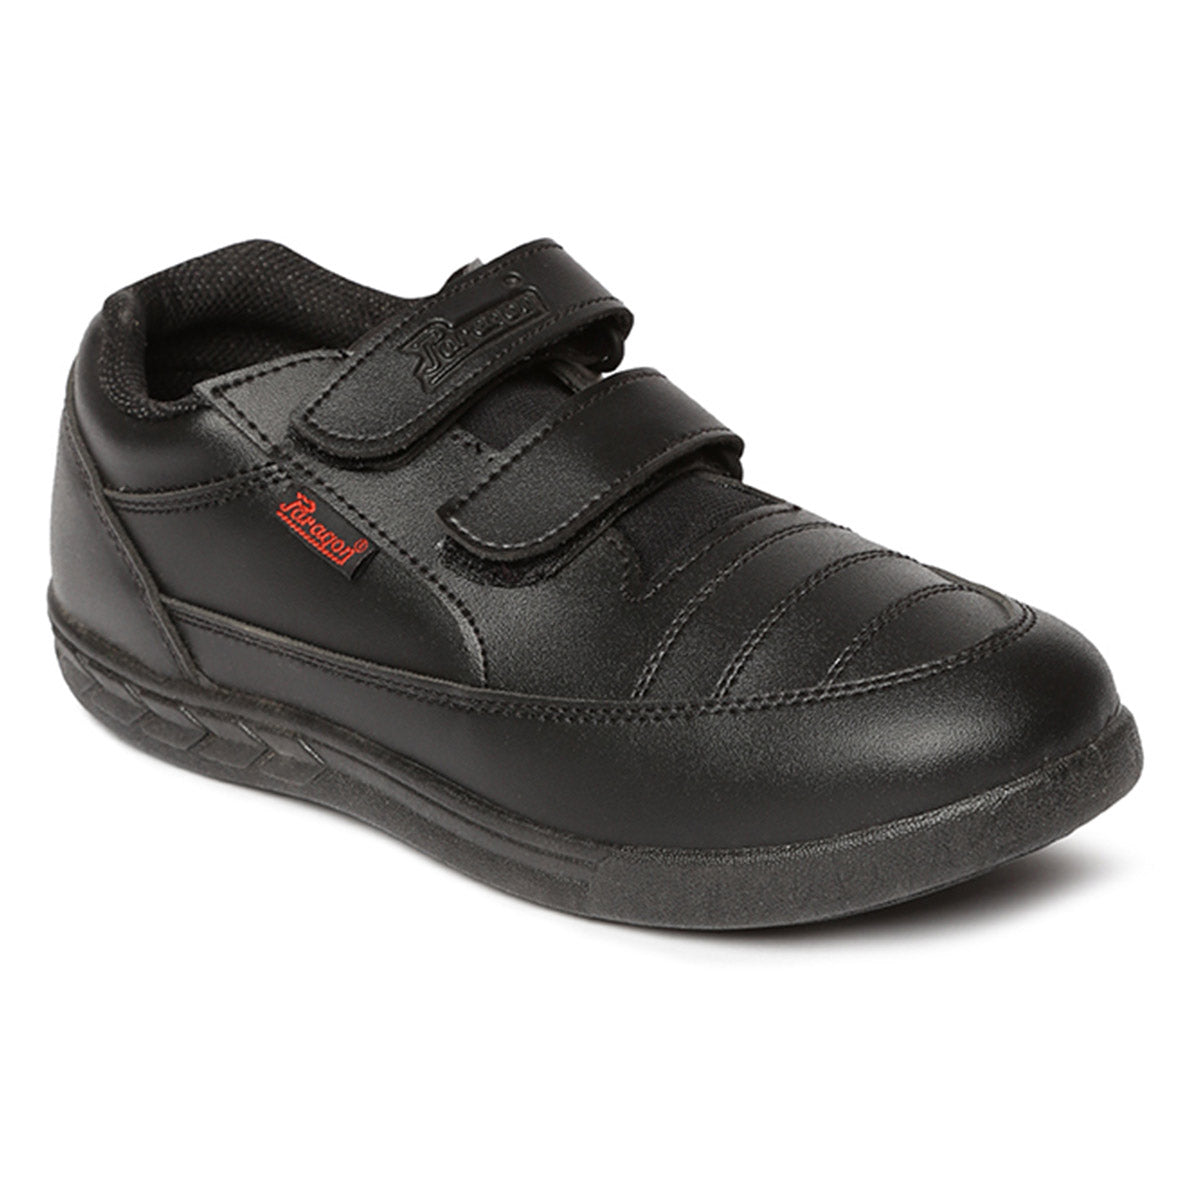 Paragon  PV0770G Kids Formal School Shoes | Comfortable Cushioned Soles | School Shoes for Boys &amp; Girls